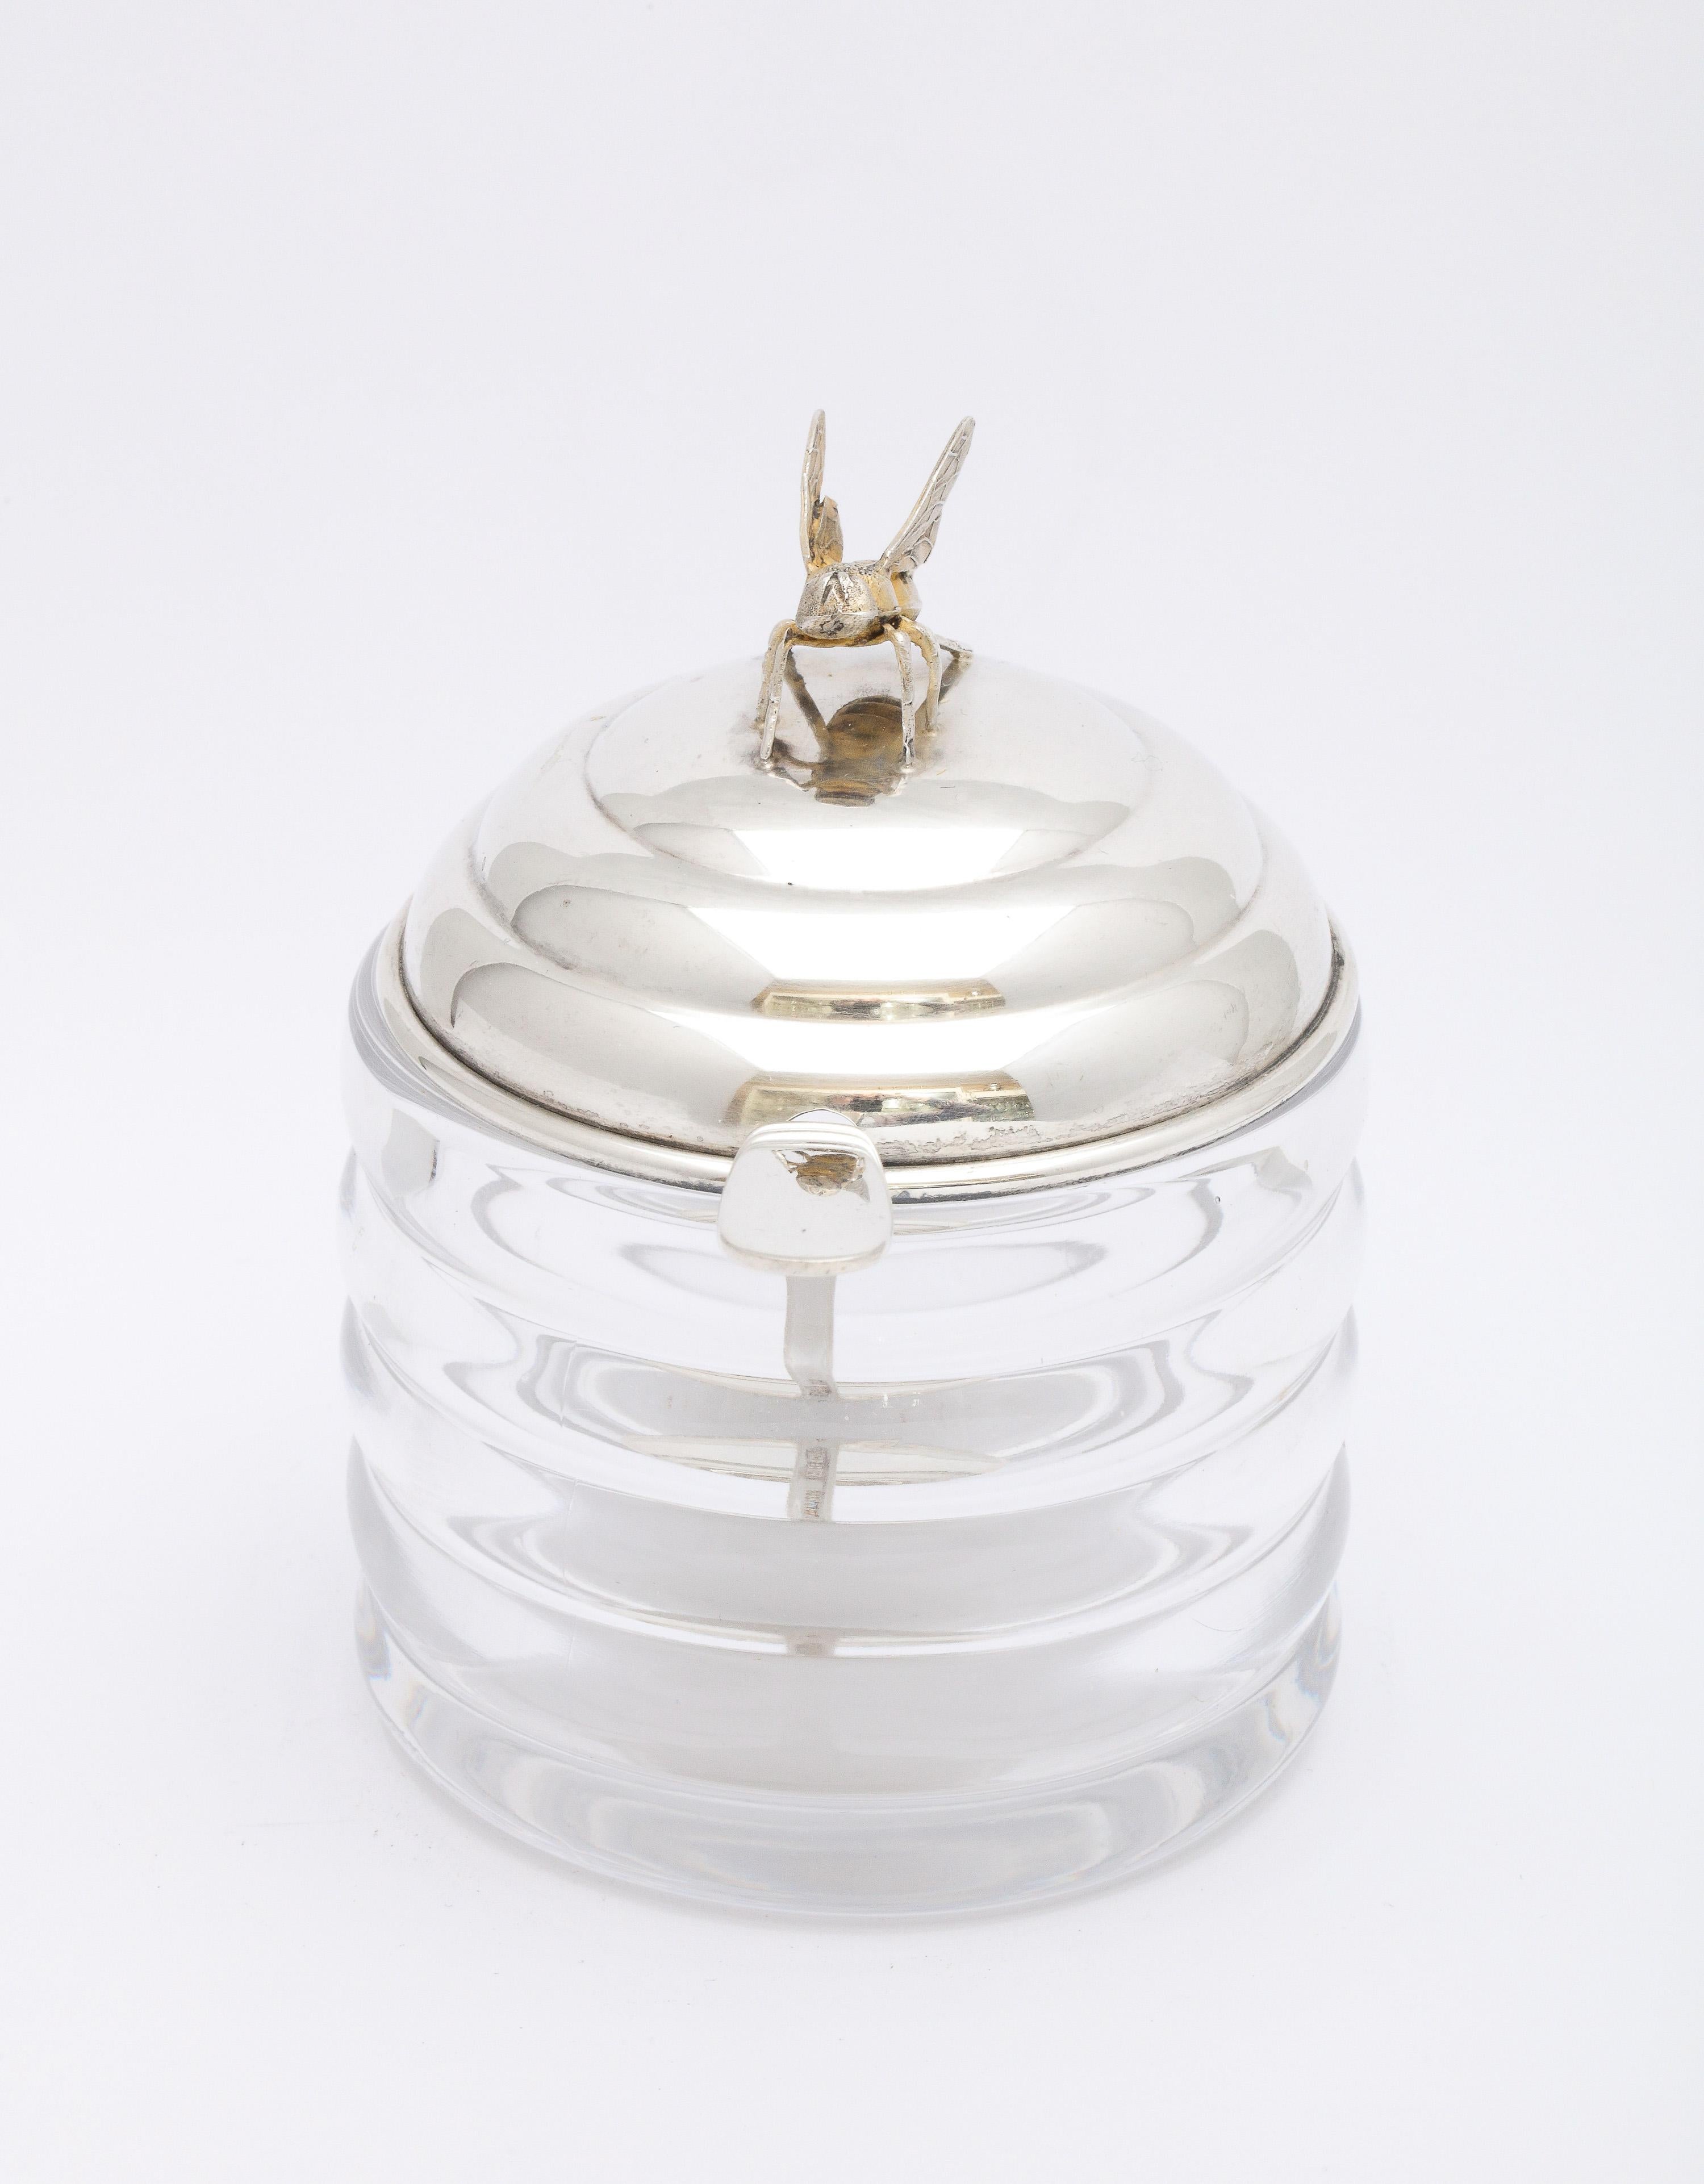 Mid-20th Century Art Deco Period Sterling Silver-Mounted Beehive-Form Honey Jar